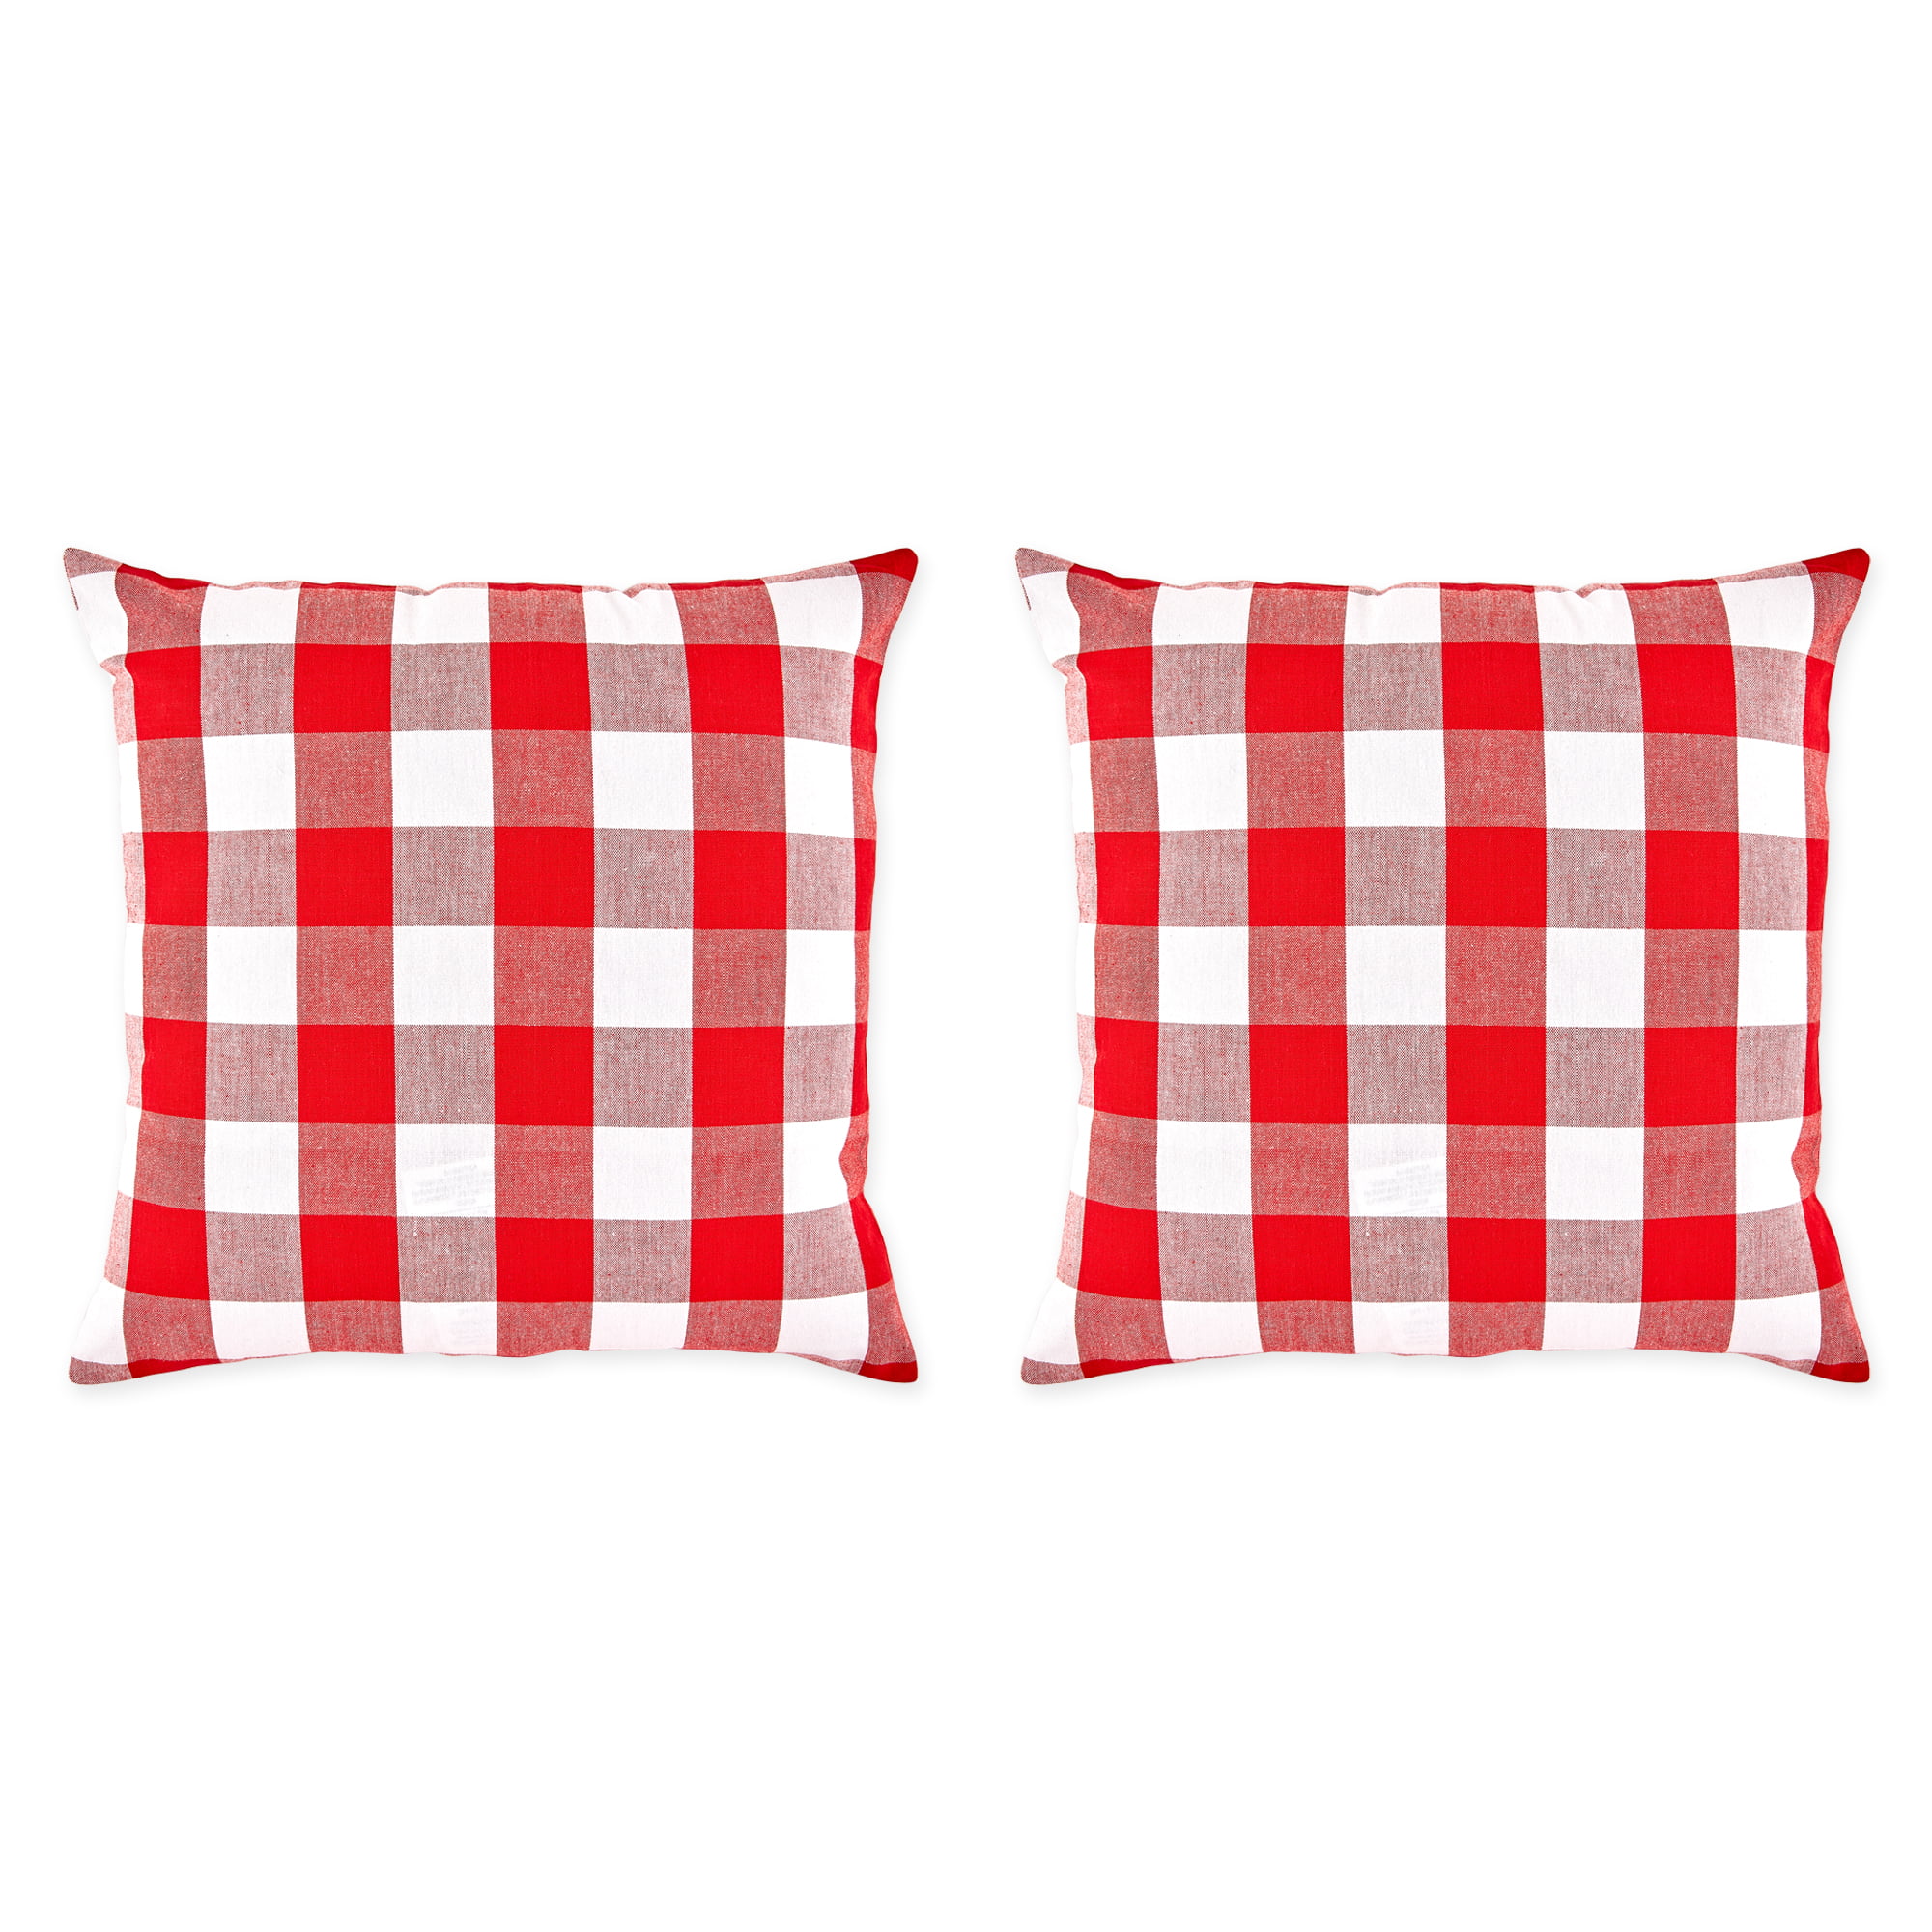 Macochico Set of 2 Buffalo Check Pillow Covers Red and Black Plaid Throw Pill... 